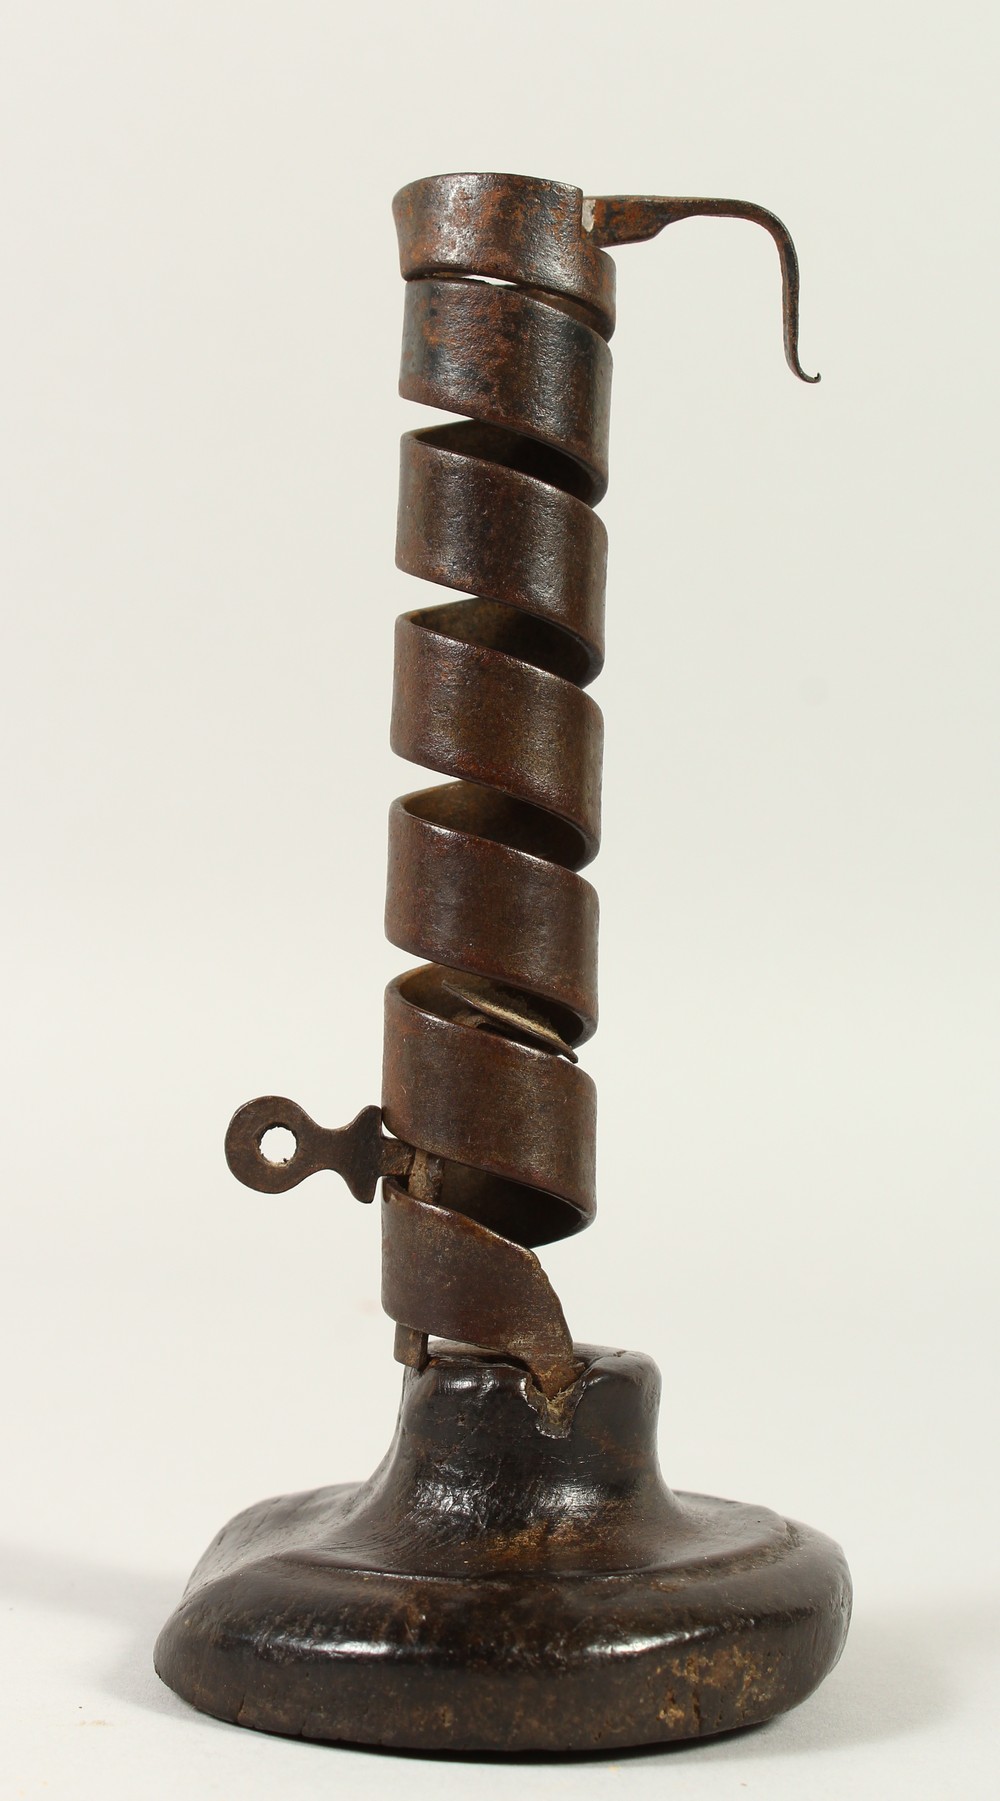 AN EARLY IRON CANDLESTICK, on a wooden base. 19cms high.